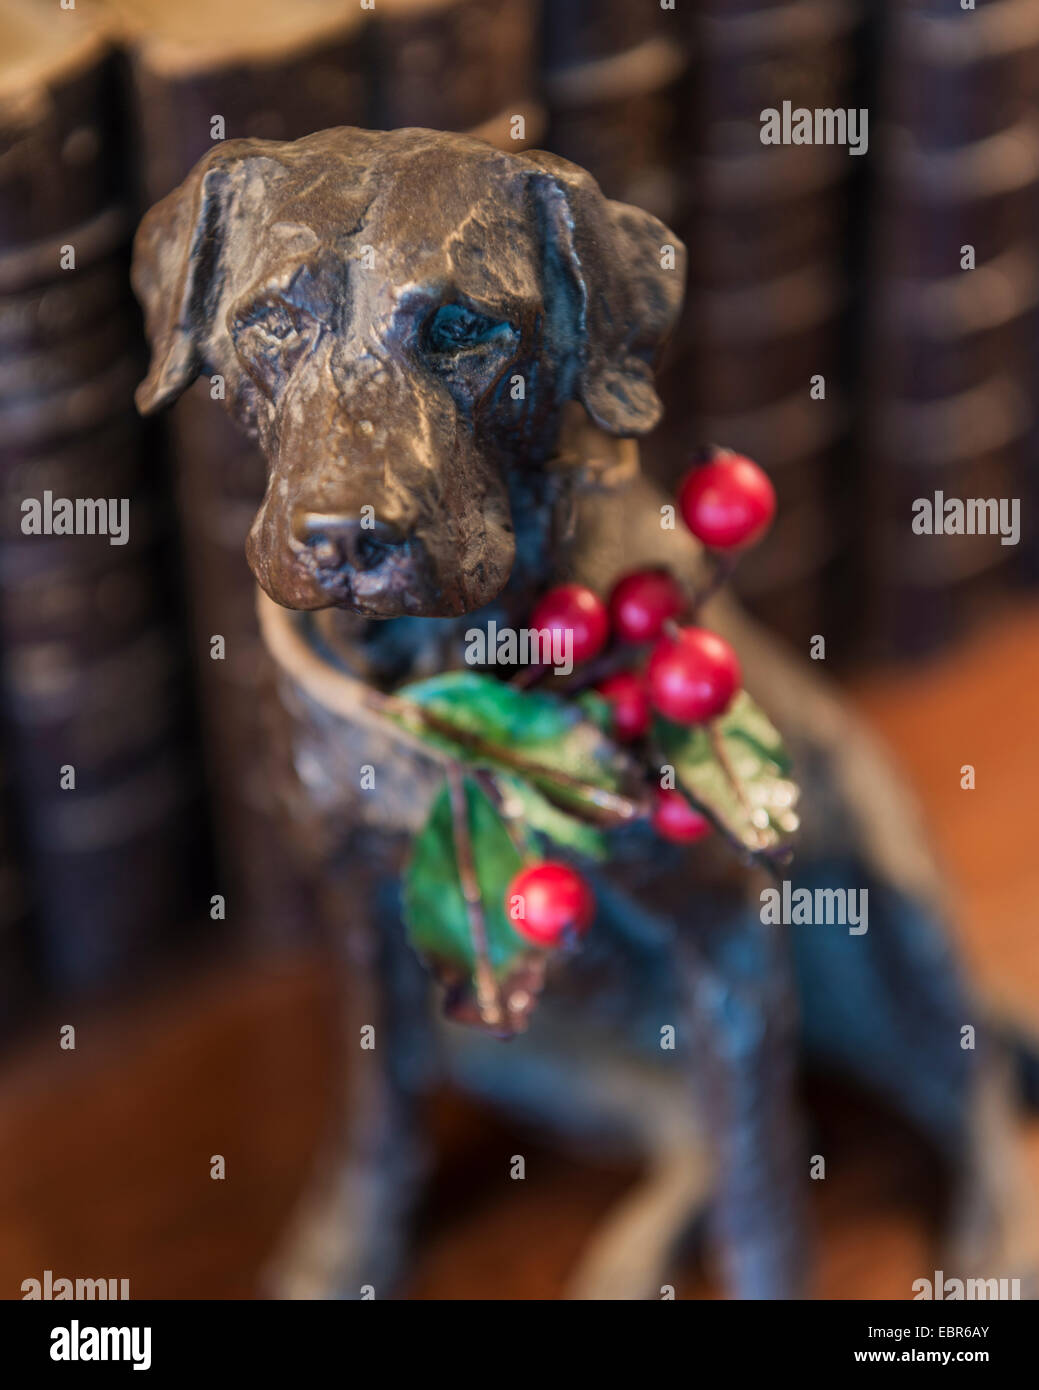 A sprig of holly adds a festive touch to a smal bronze dog statue Stock Photo